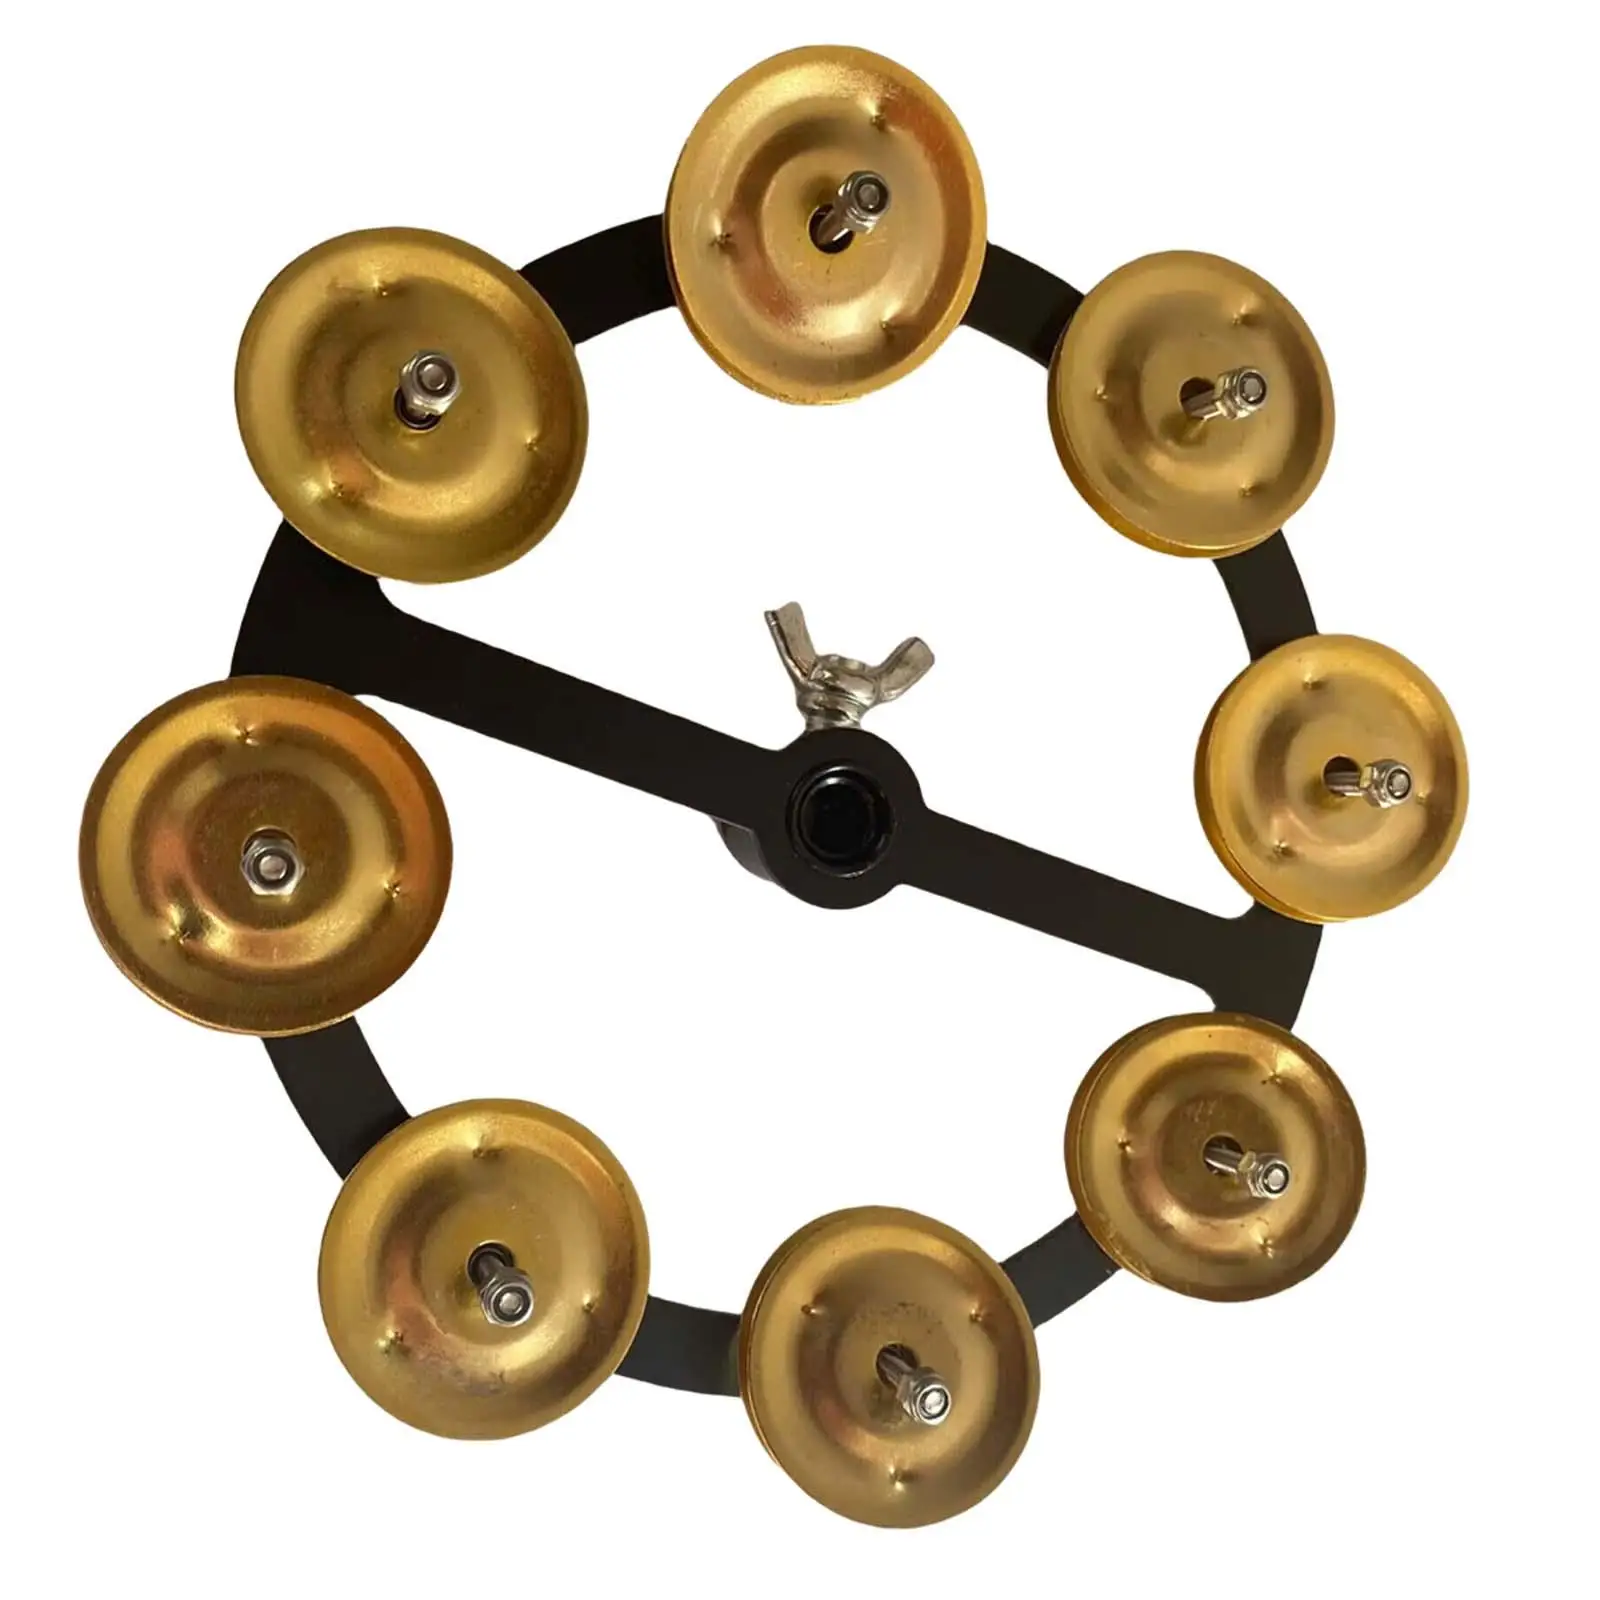 Hi Hat Tambourine Percussion Accessories for Creative Drum Kits Enthusiasts